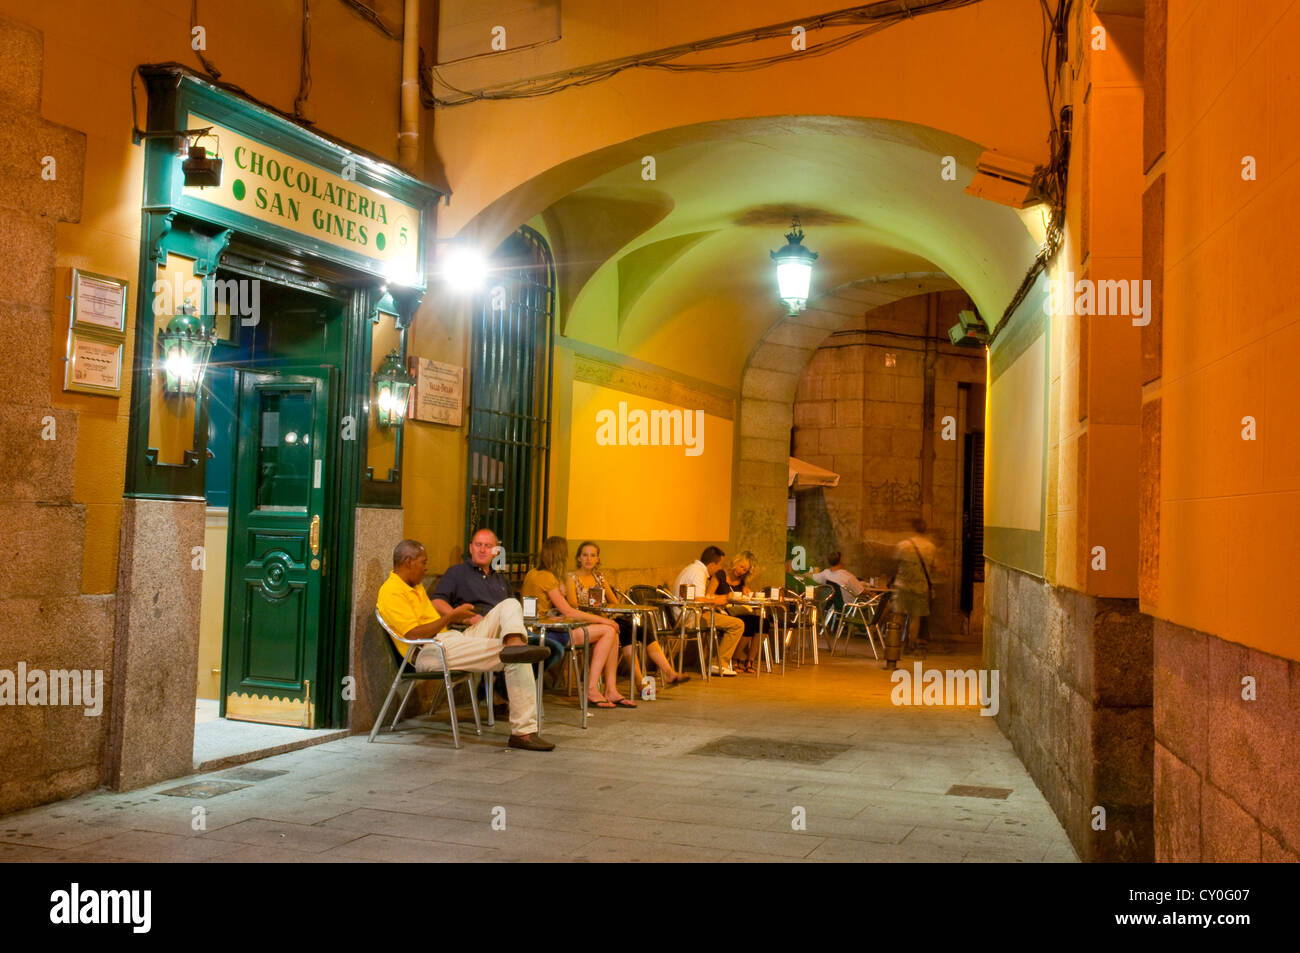 People sitting on terrace at evening. San Gines passage, Madrid, Spain. Stock Photo